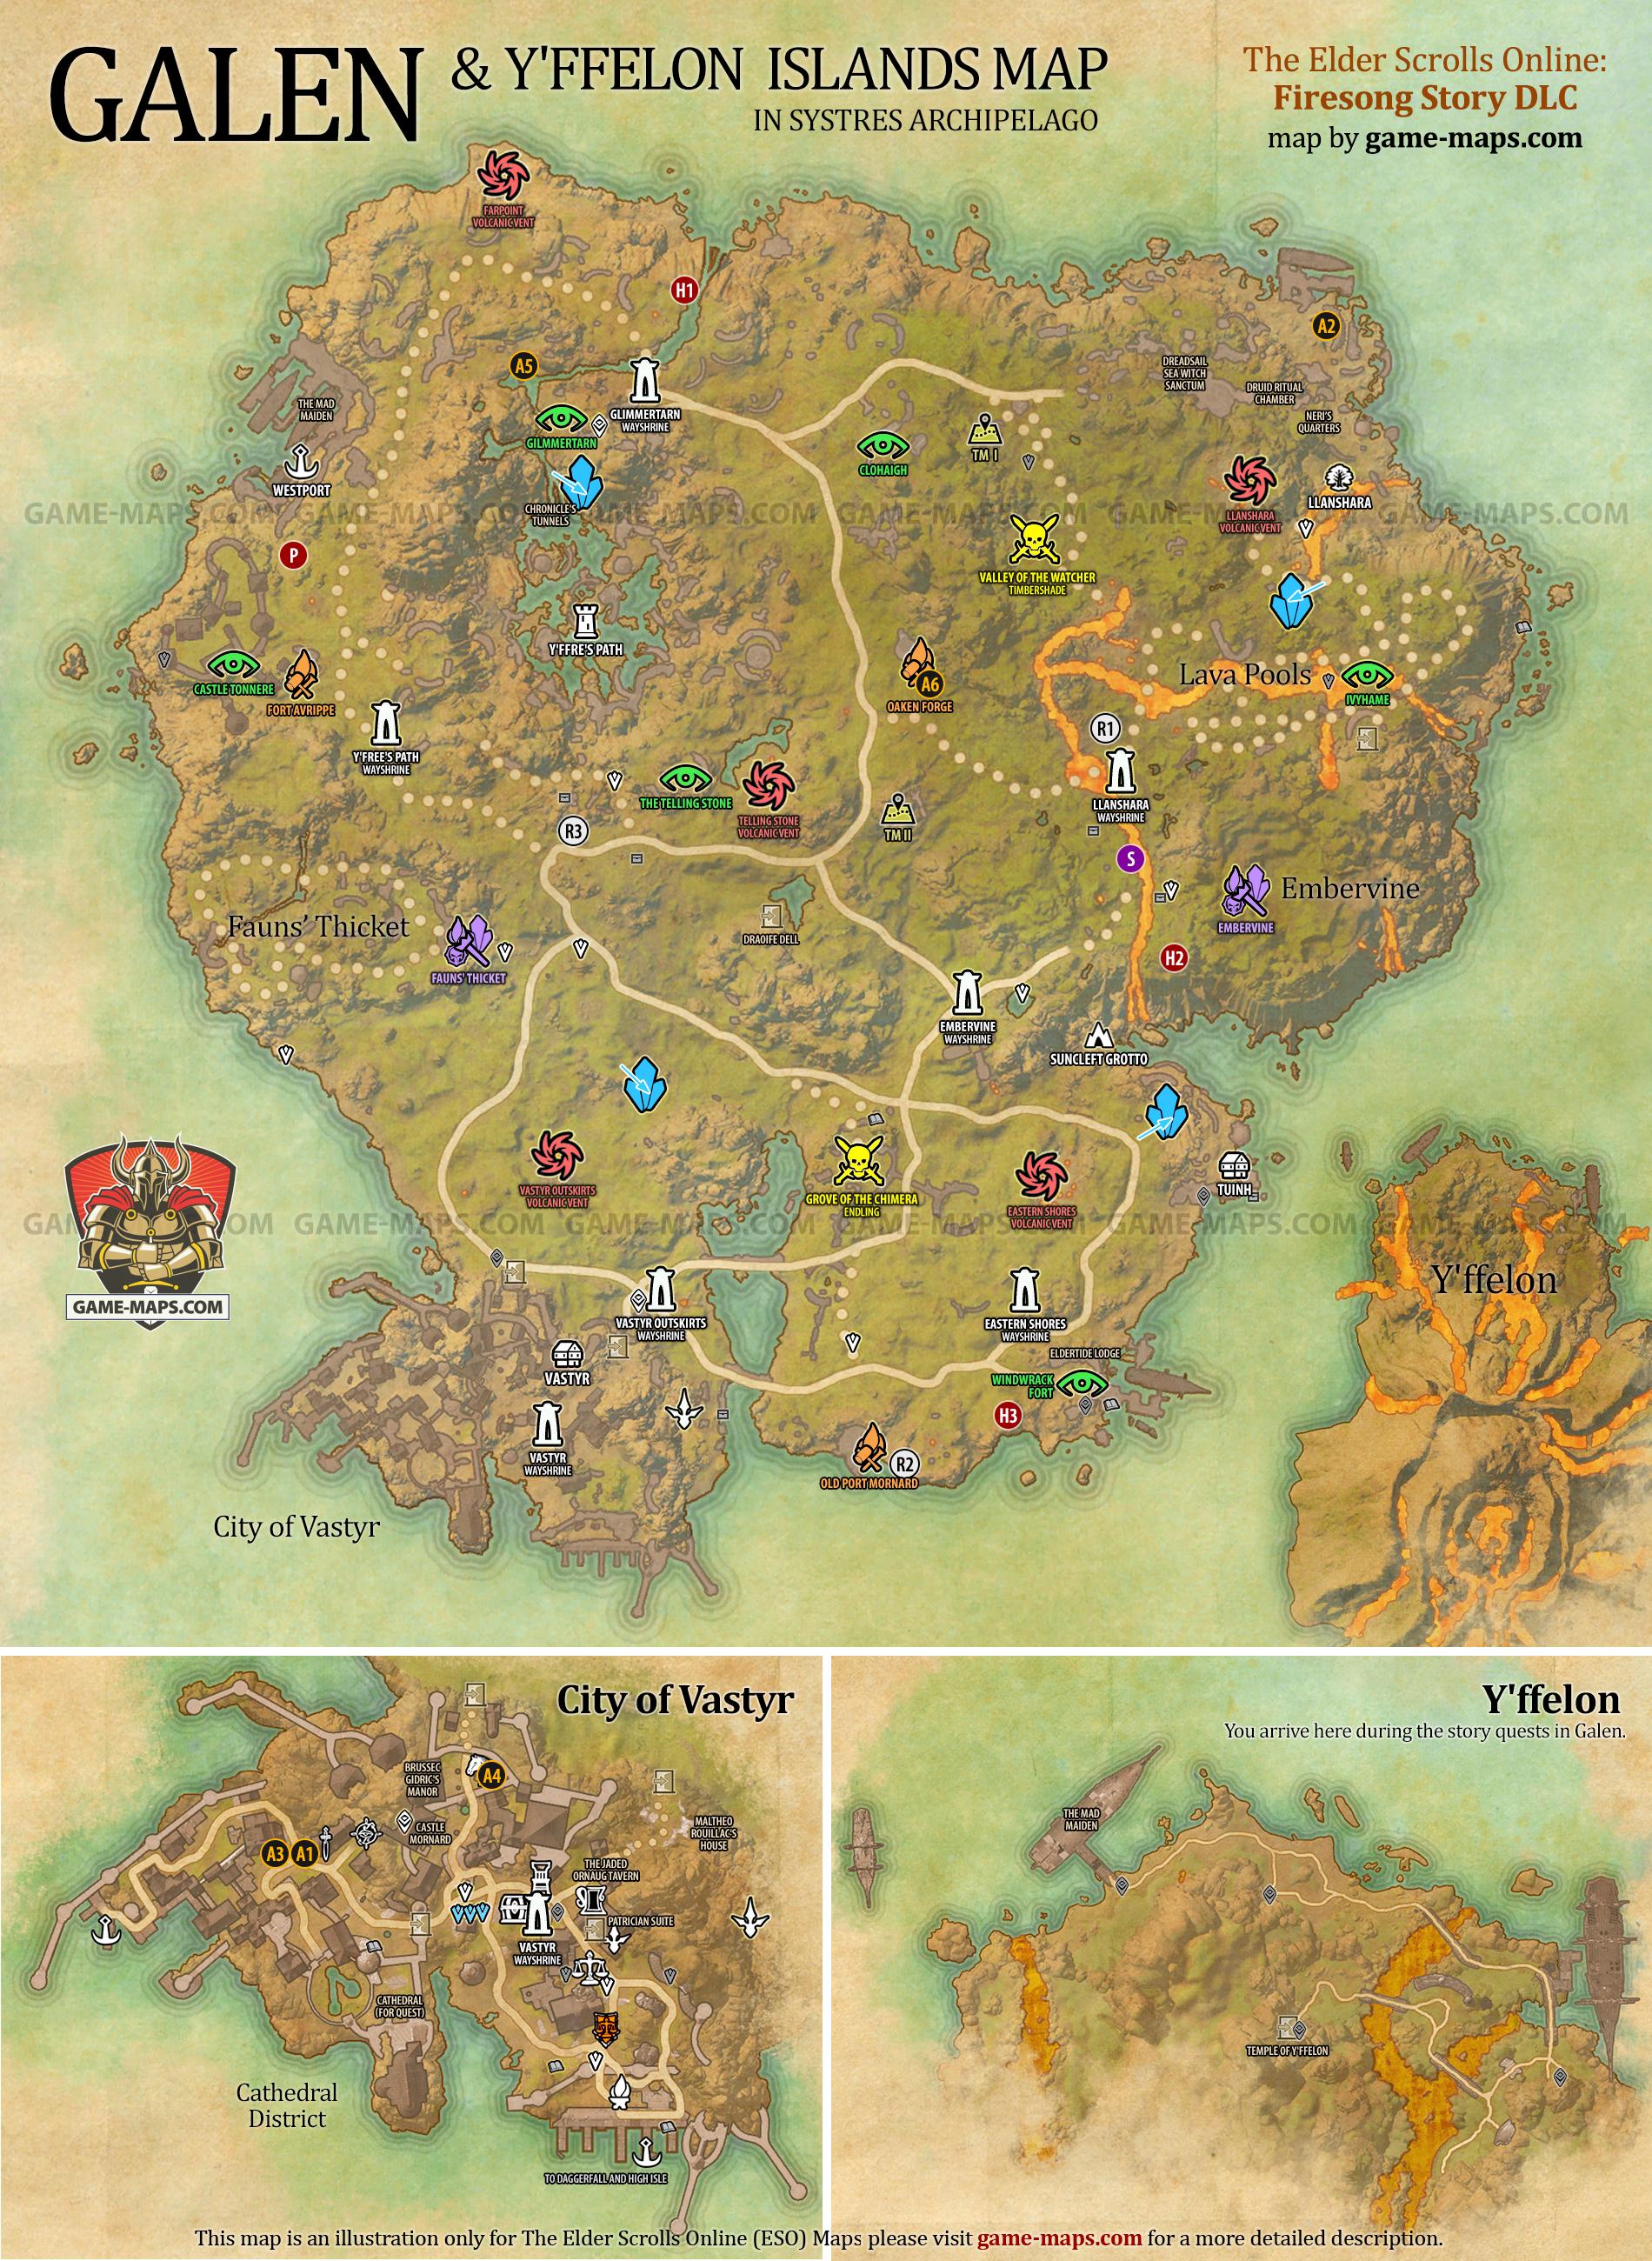 Galen and Y'ffelon Map for The Elder Scrolls Online: Firesong Story DLC, Legacy of the Bretons 2022 Adventure (ESO).